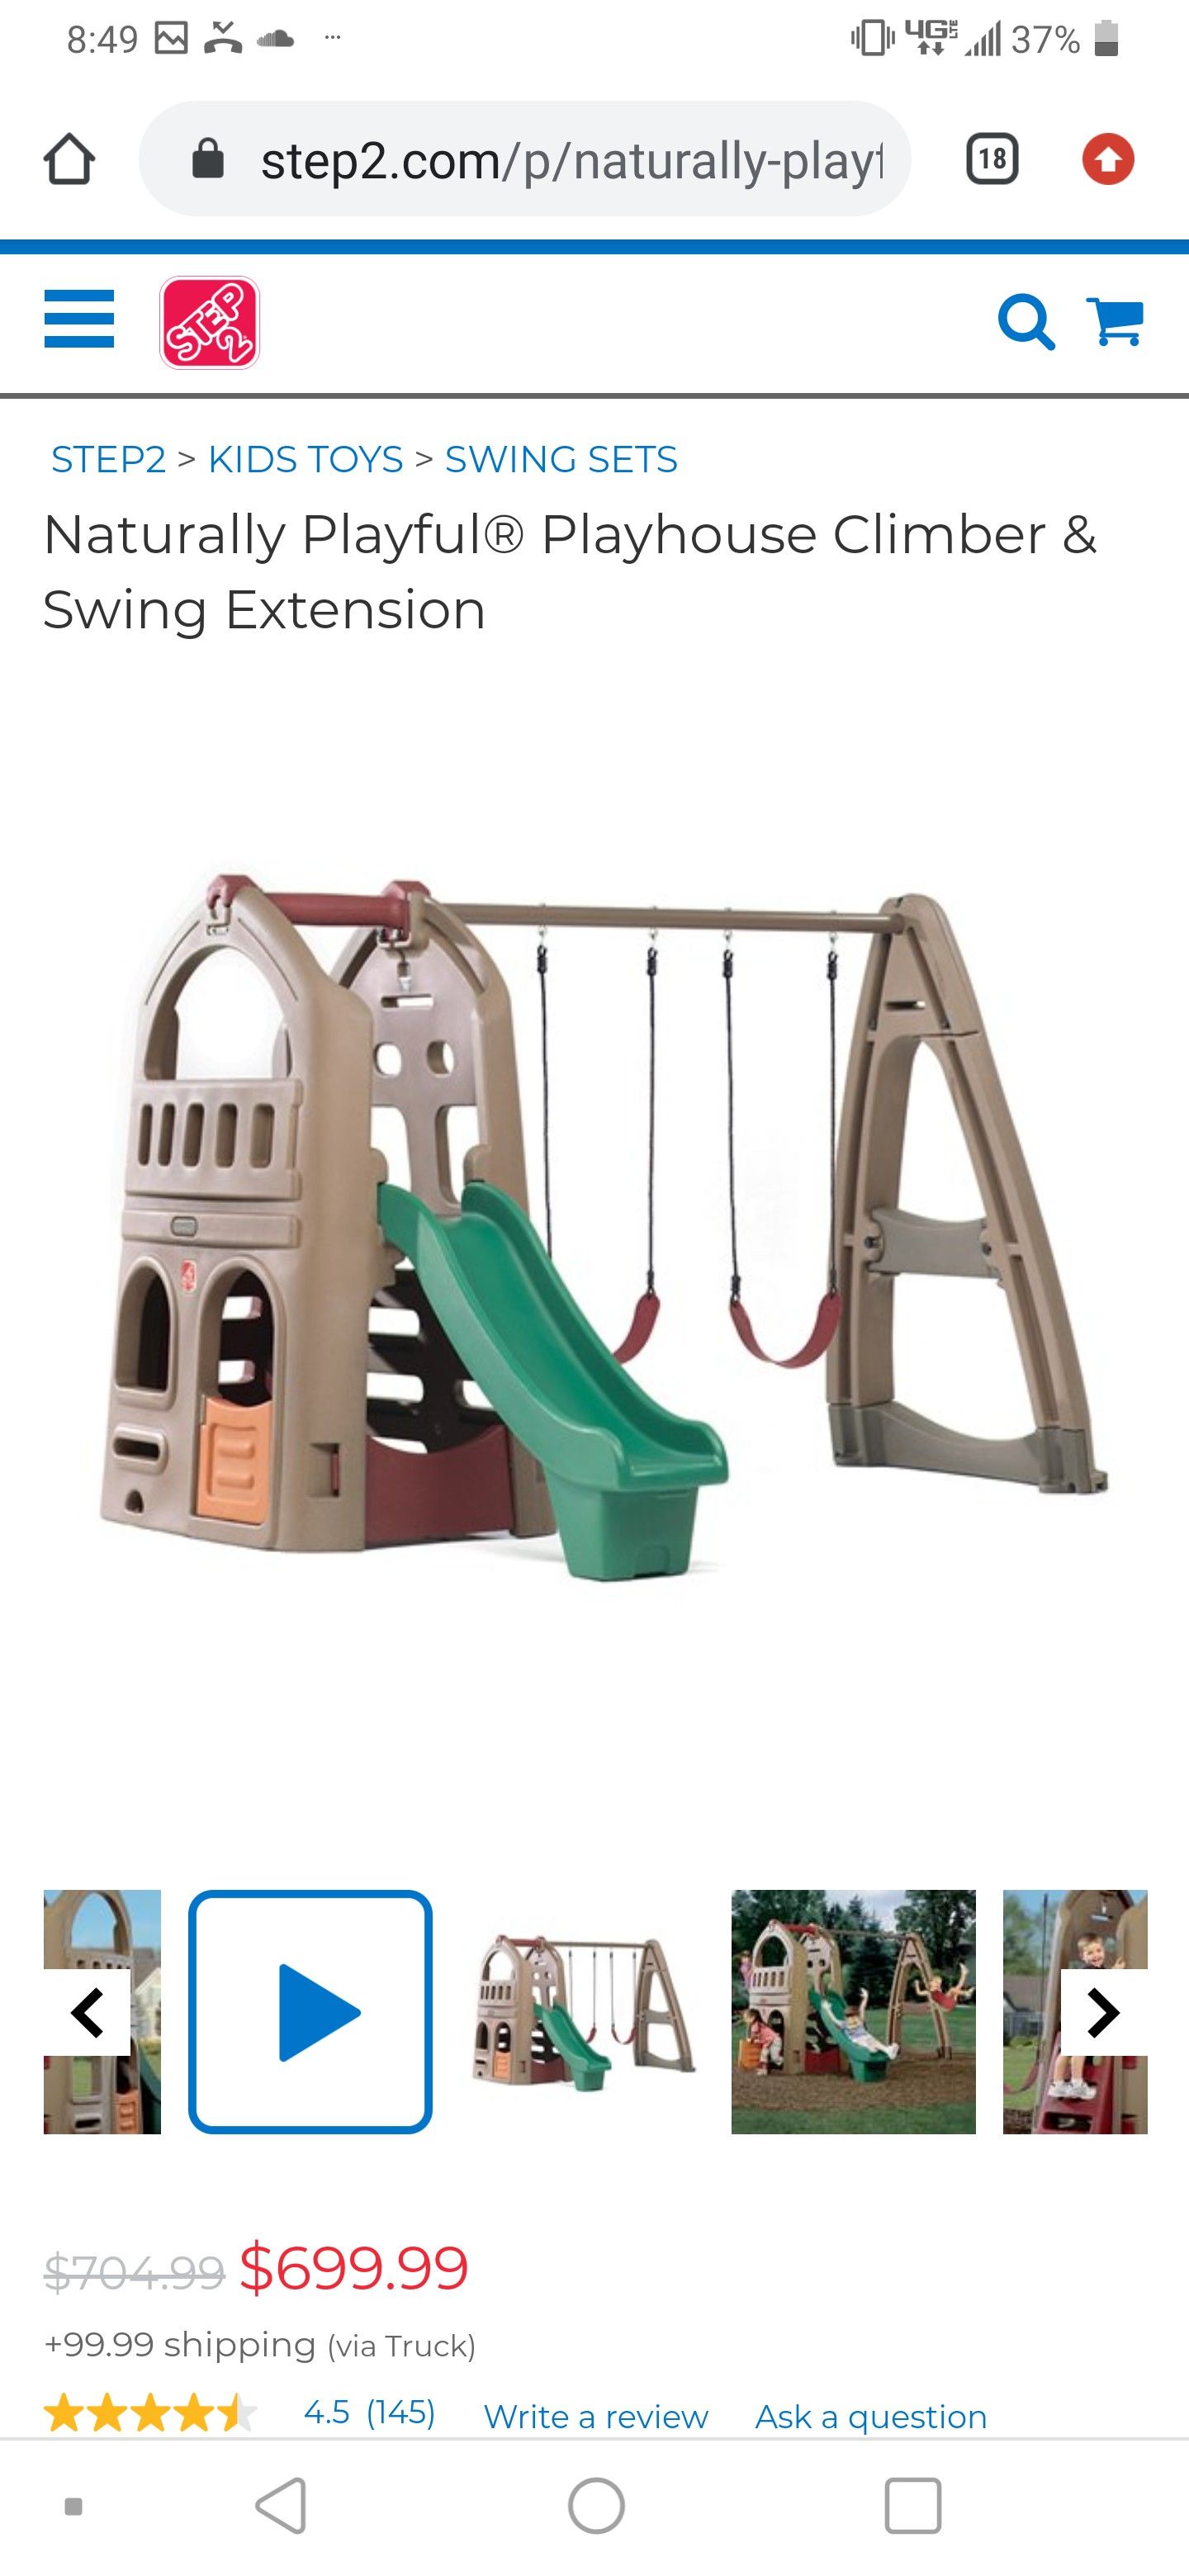 Step2 Naturally Playful® Playhouse Climber & Swing Extension; plastic swing set with slide